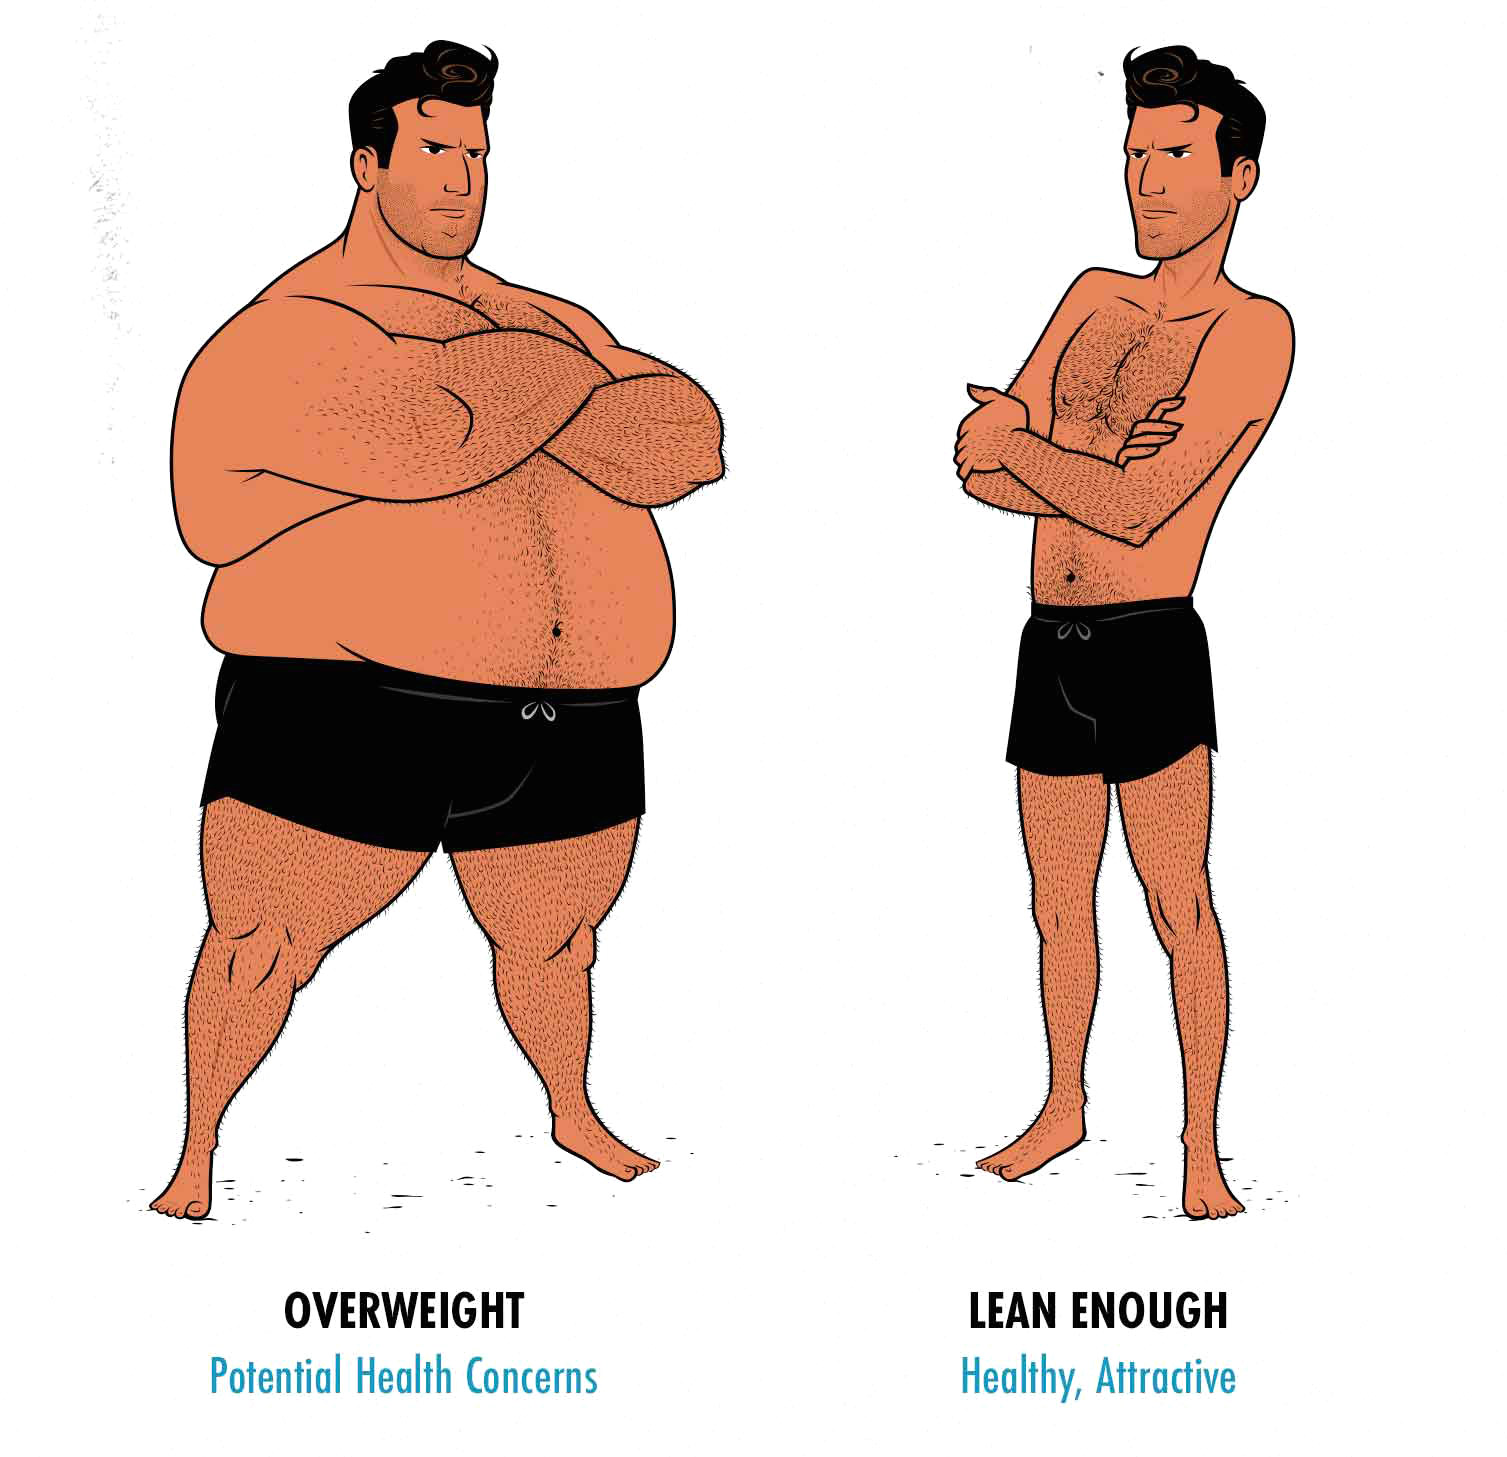 Illustration showing the ideal male body-fat percentage